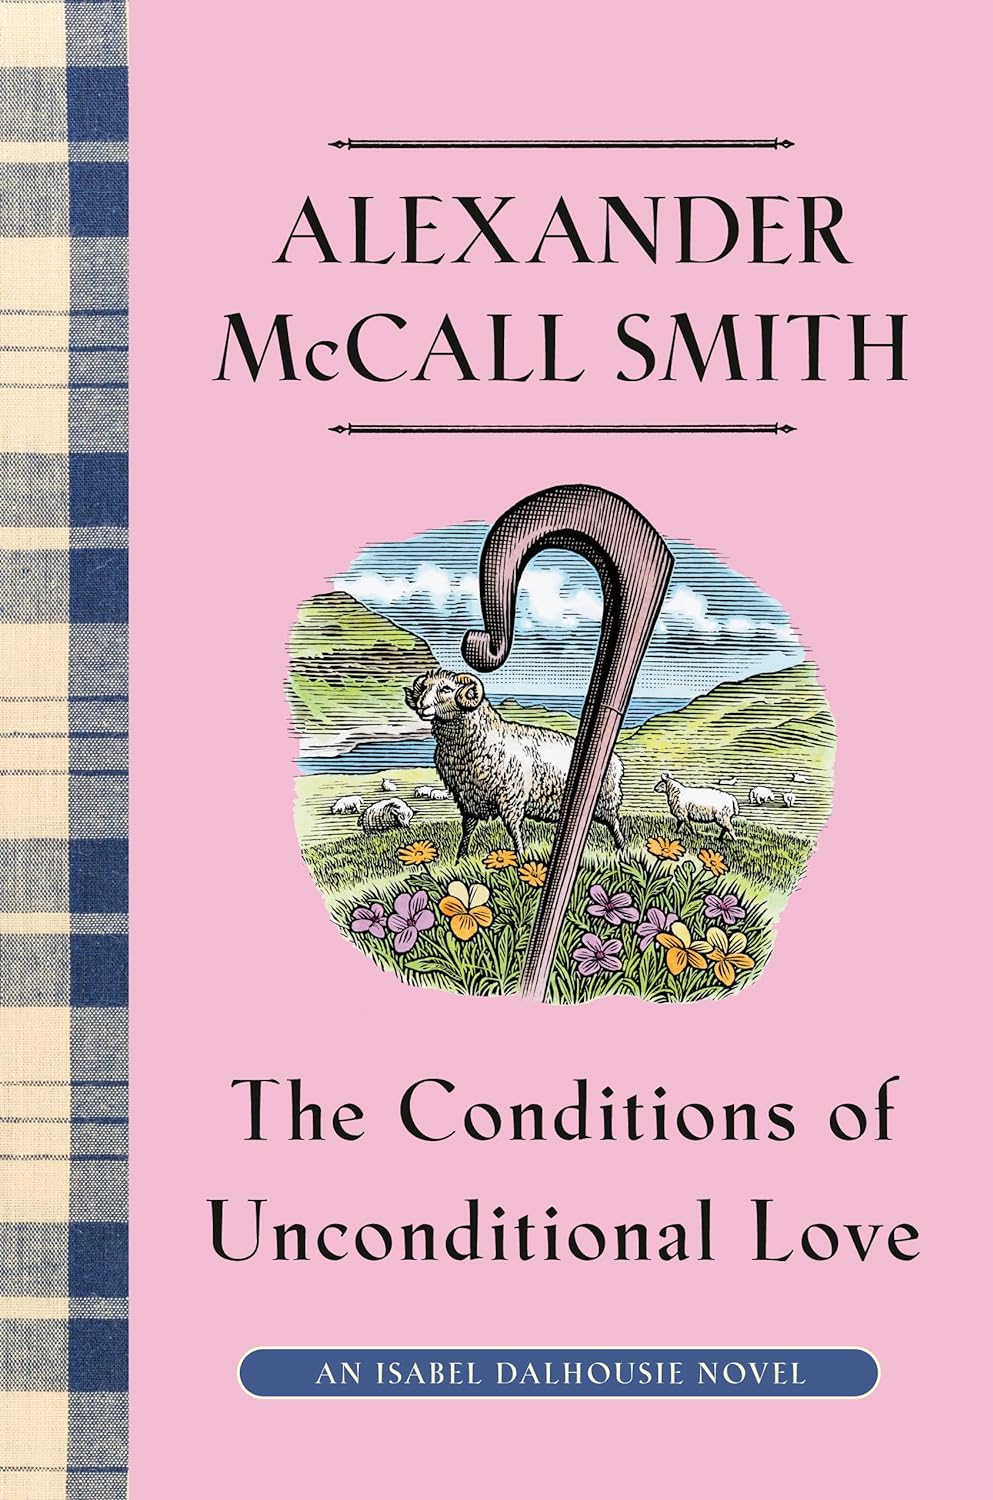 Image for "The Conditions of Unconditional Love"